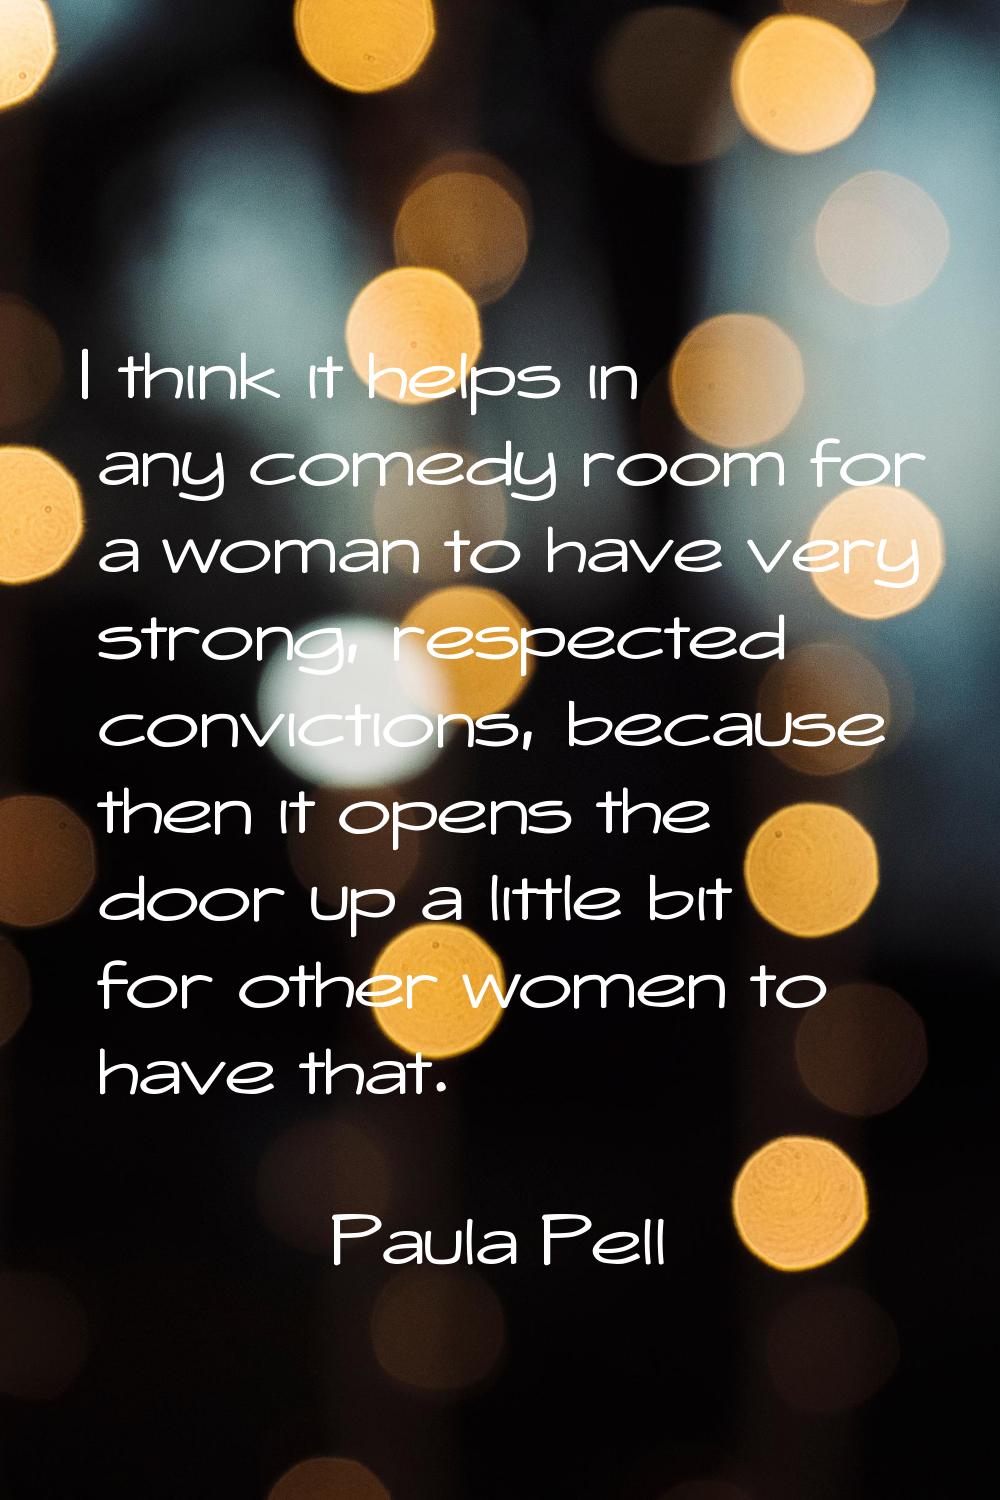 I think it helps in any comedy room for a woman to have very strong, respected convictions, because